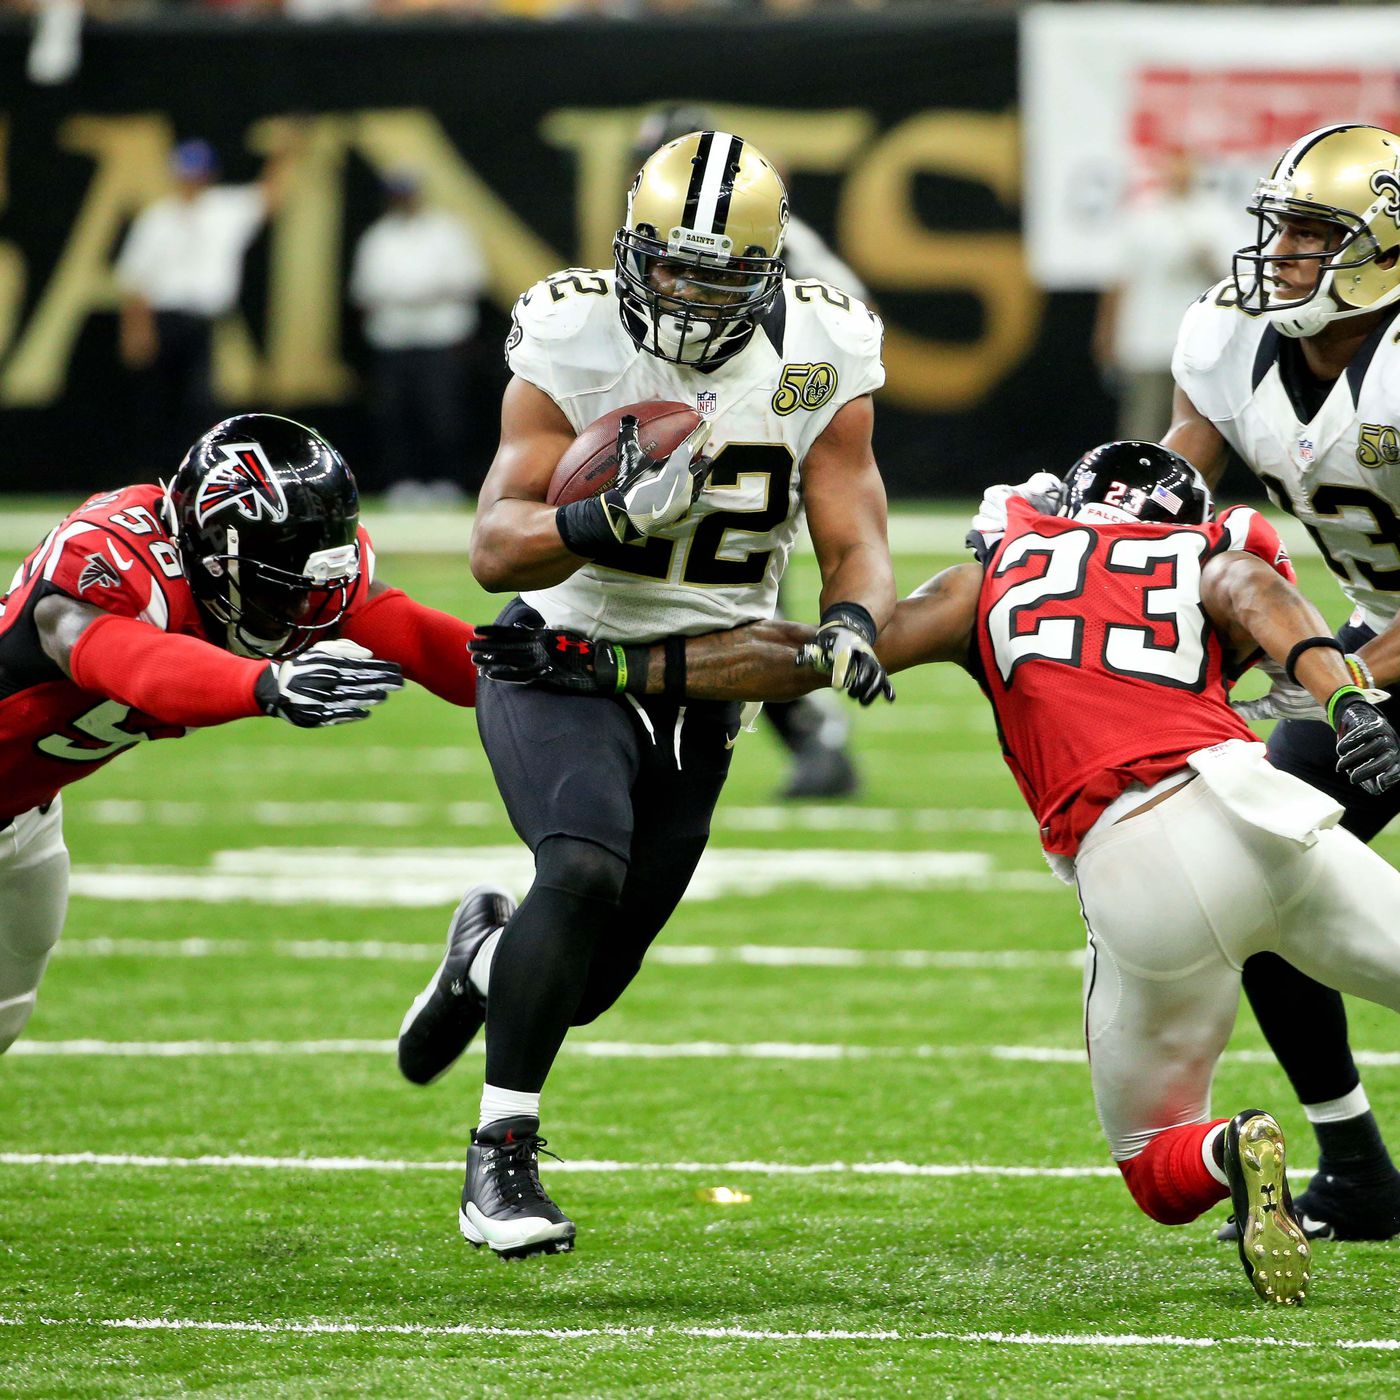 SAINTS PREVIEW: NOLA back in dome for divisional matchup